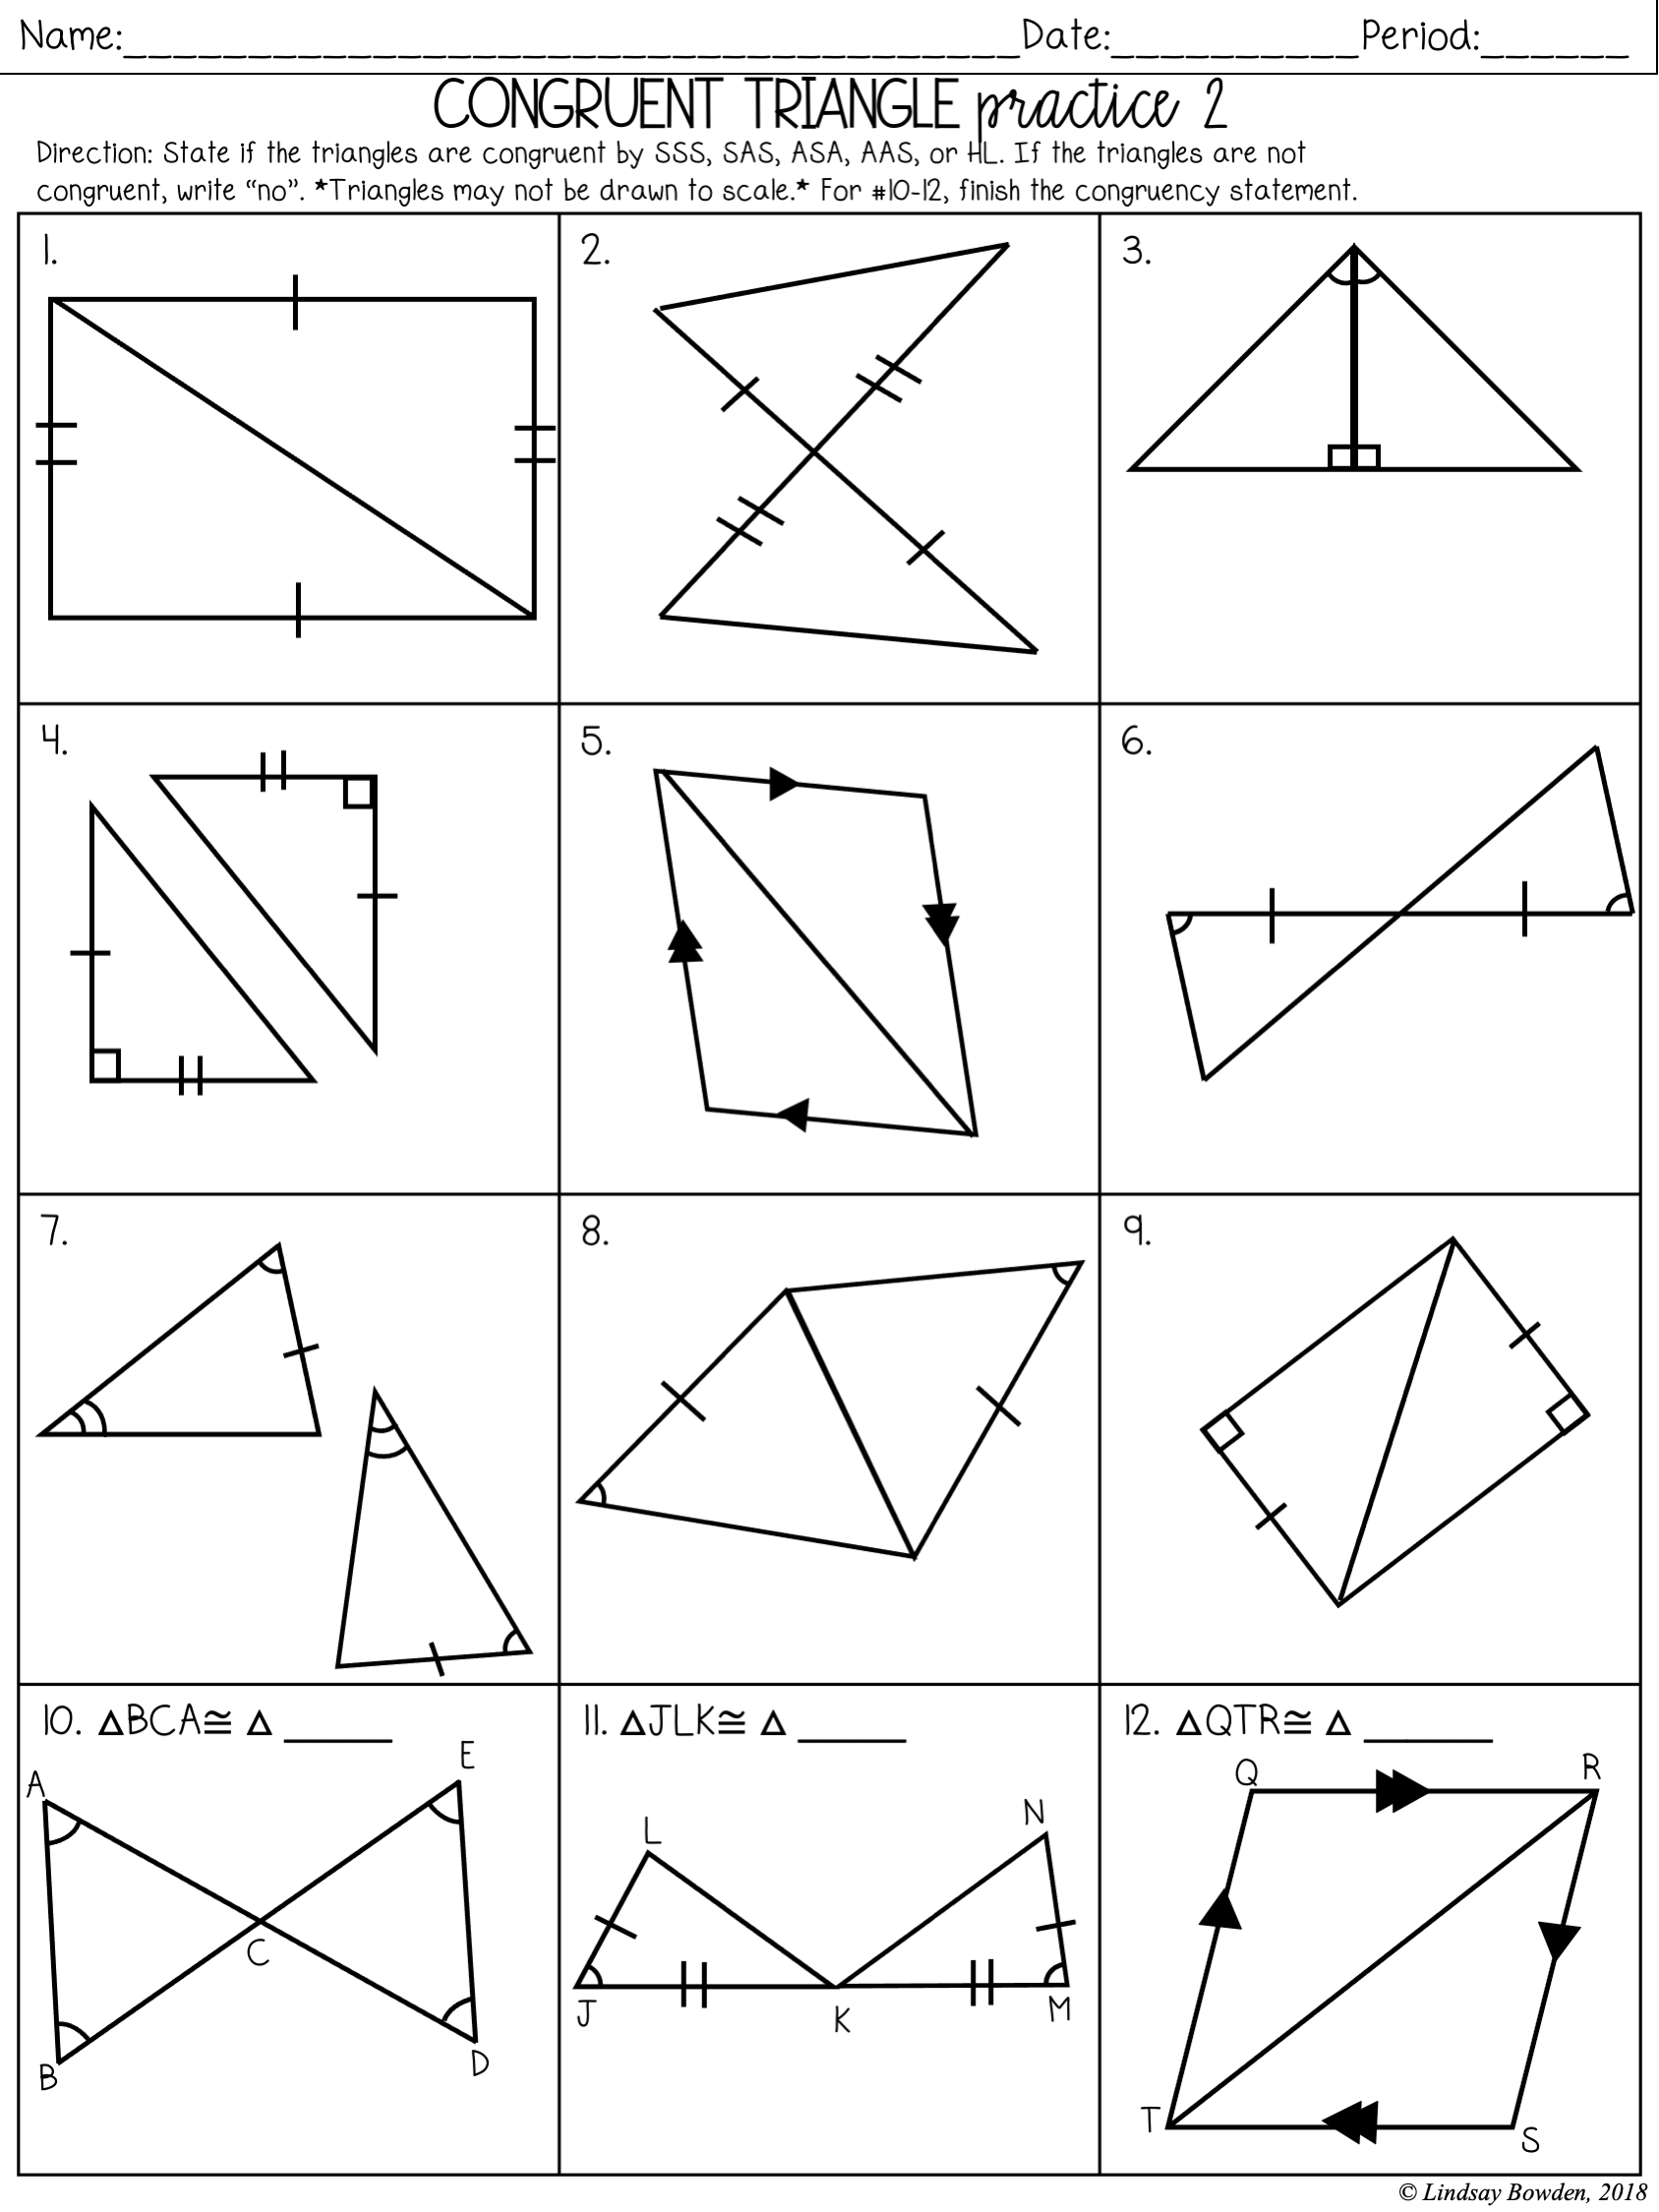 Congruent Triangles Notes and Worksheets - Lindsay Bowden Within Proving Triangles Congruent Worksheet Answers